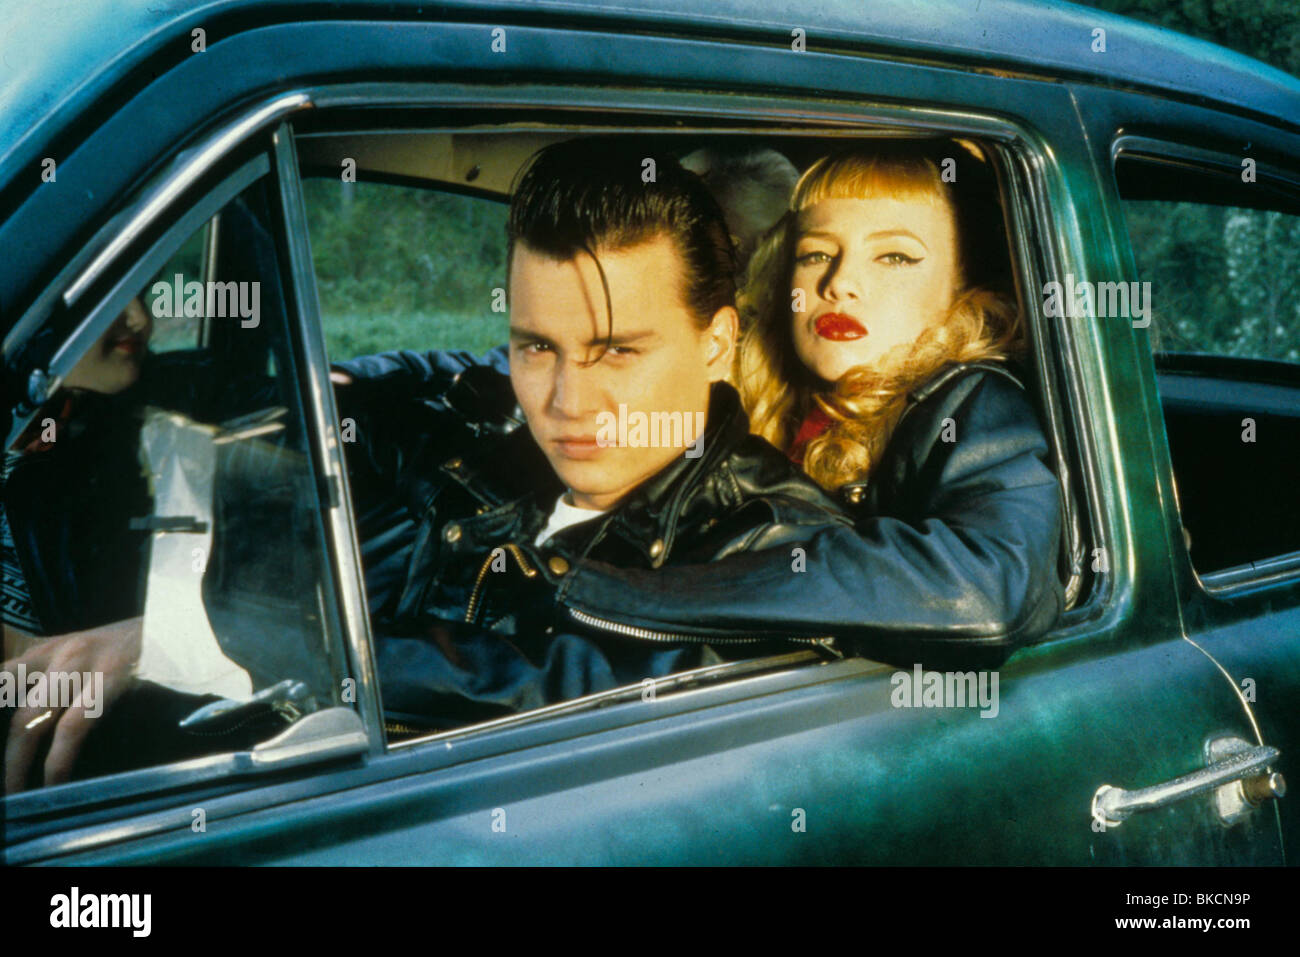 CRY BABY (1990) JOHNNY DEPP, TRACI LORDS CRY 024 Stock Photo